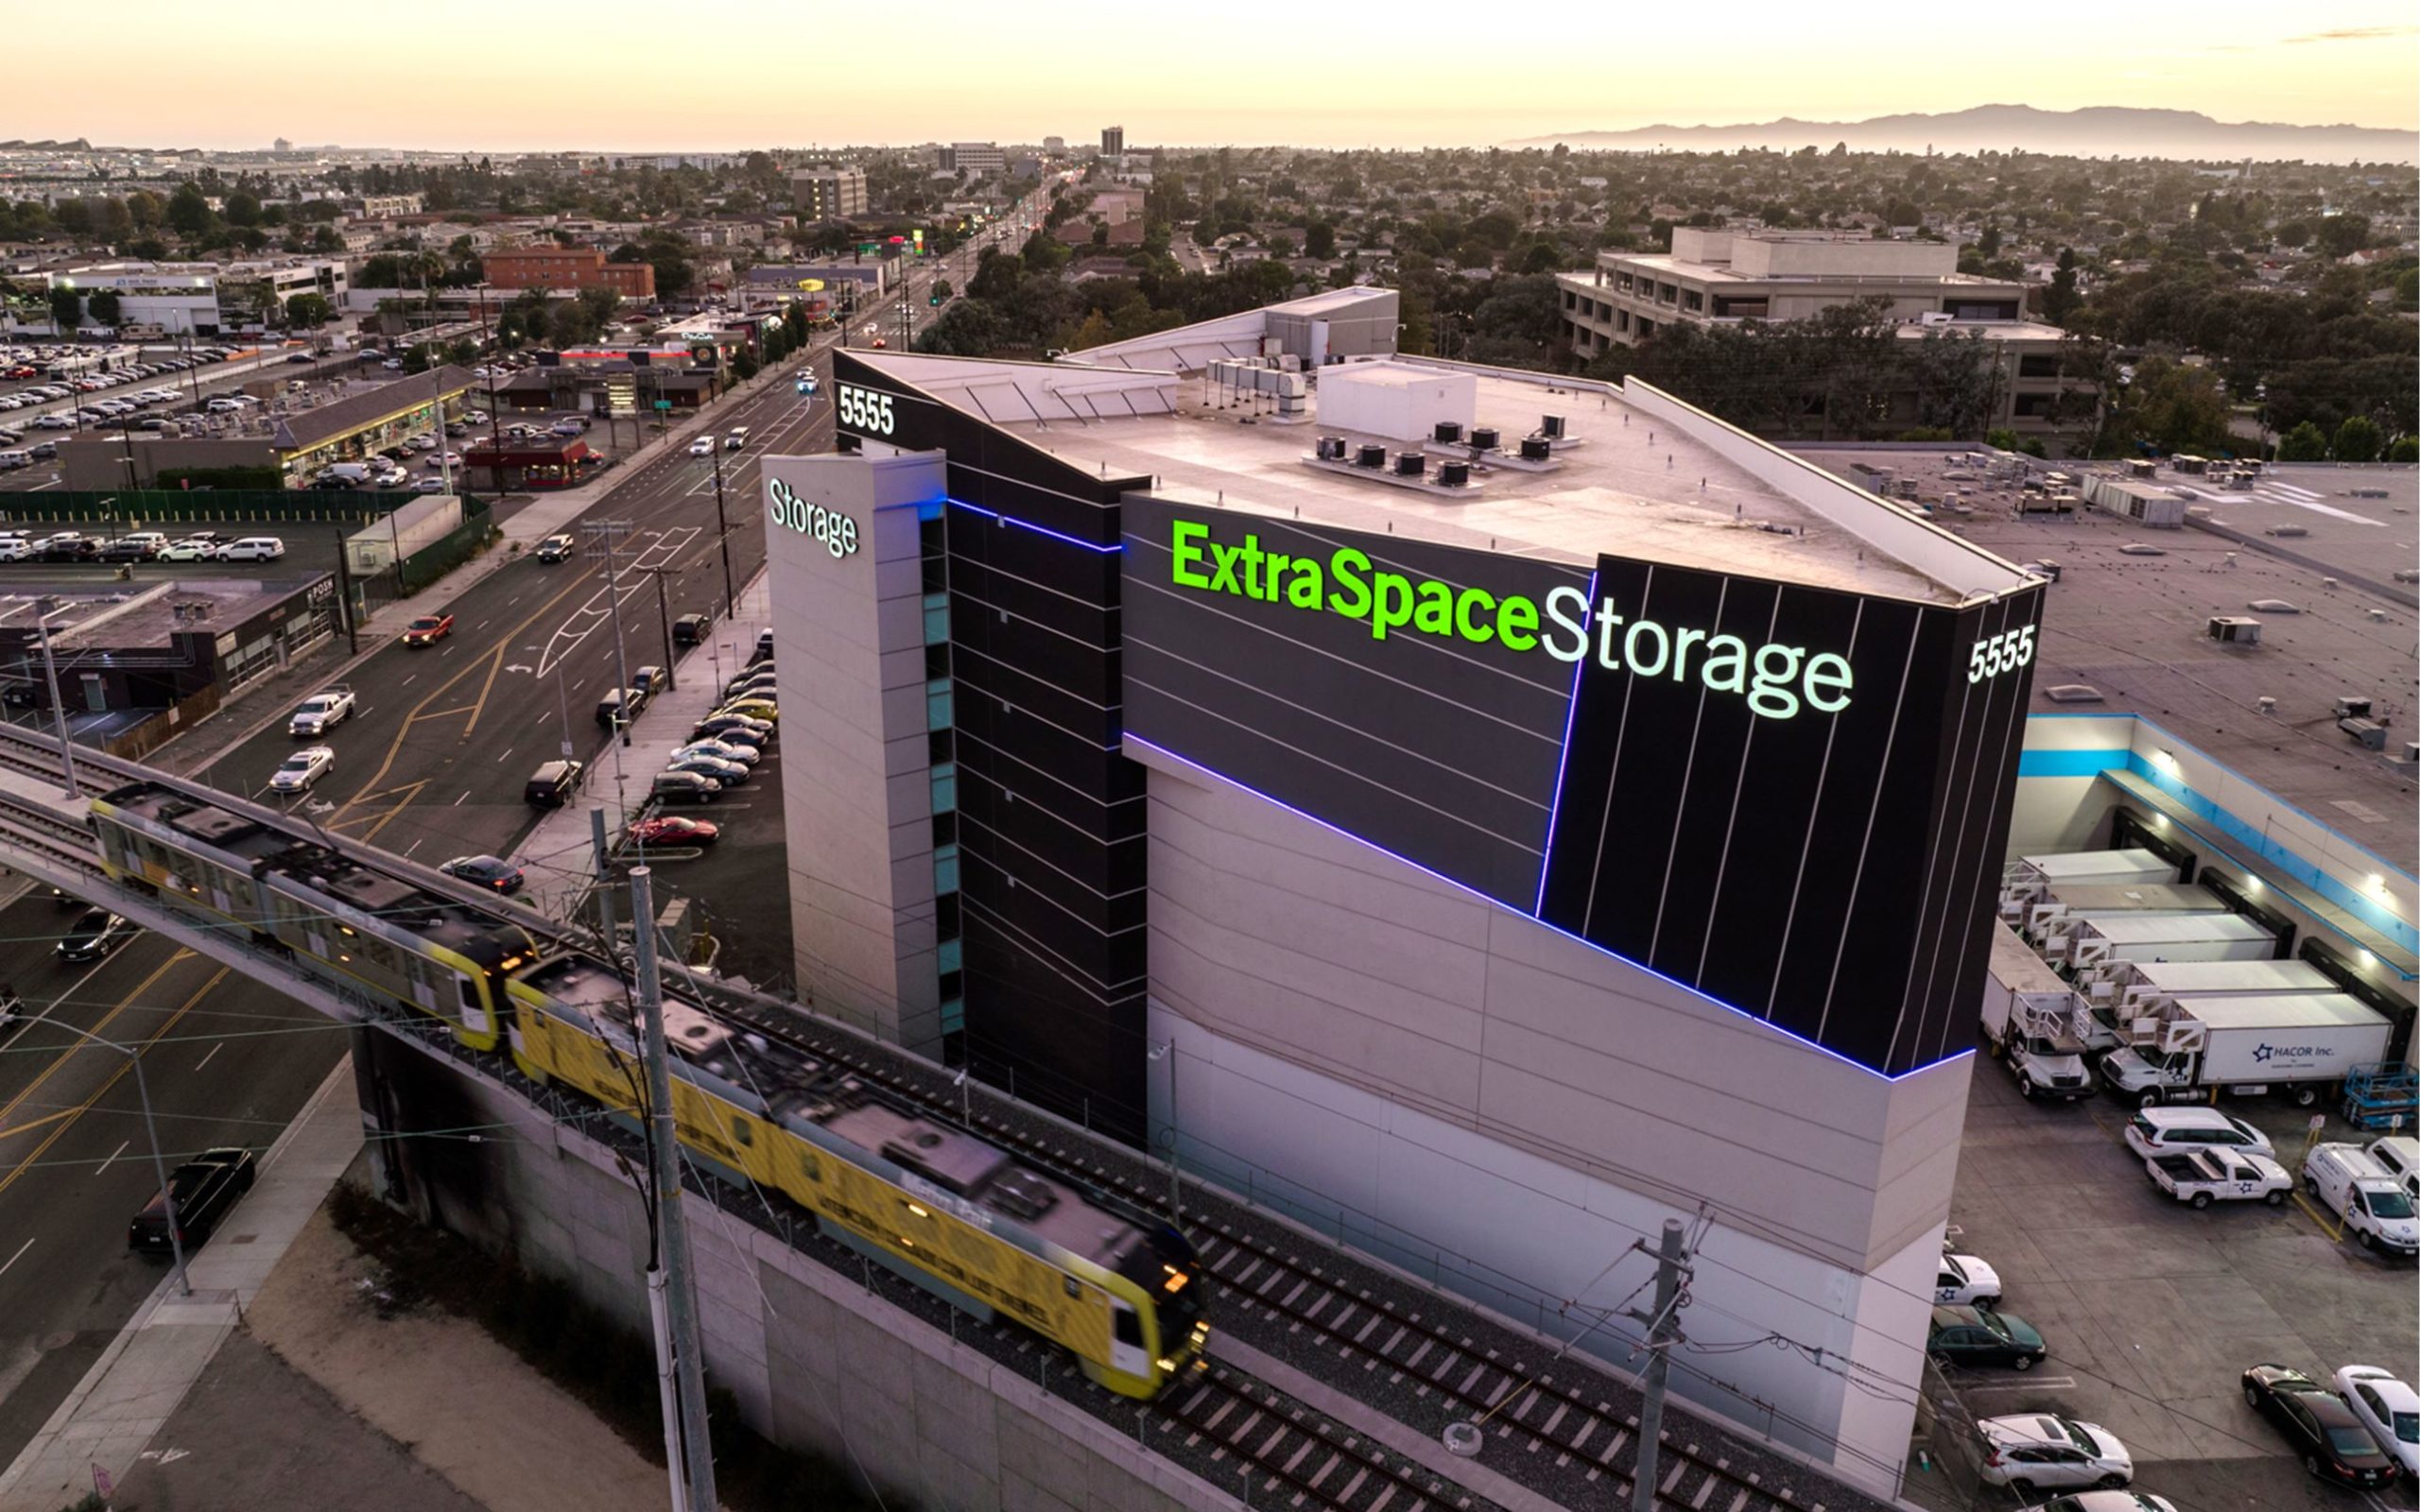 Extra Space Storage facility at 5555 W Manchester Ave in Los Angeles, CA